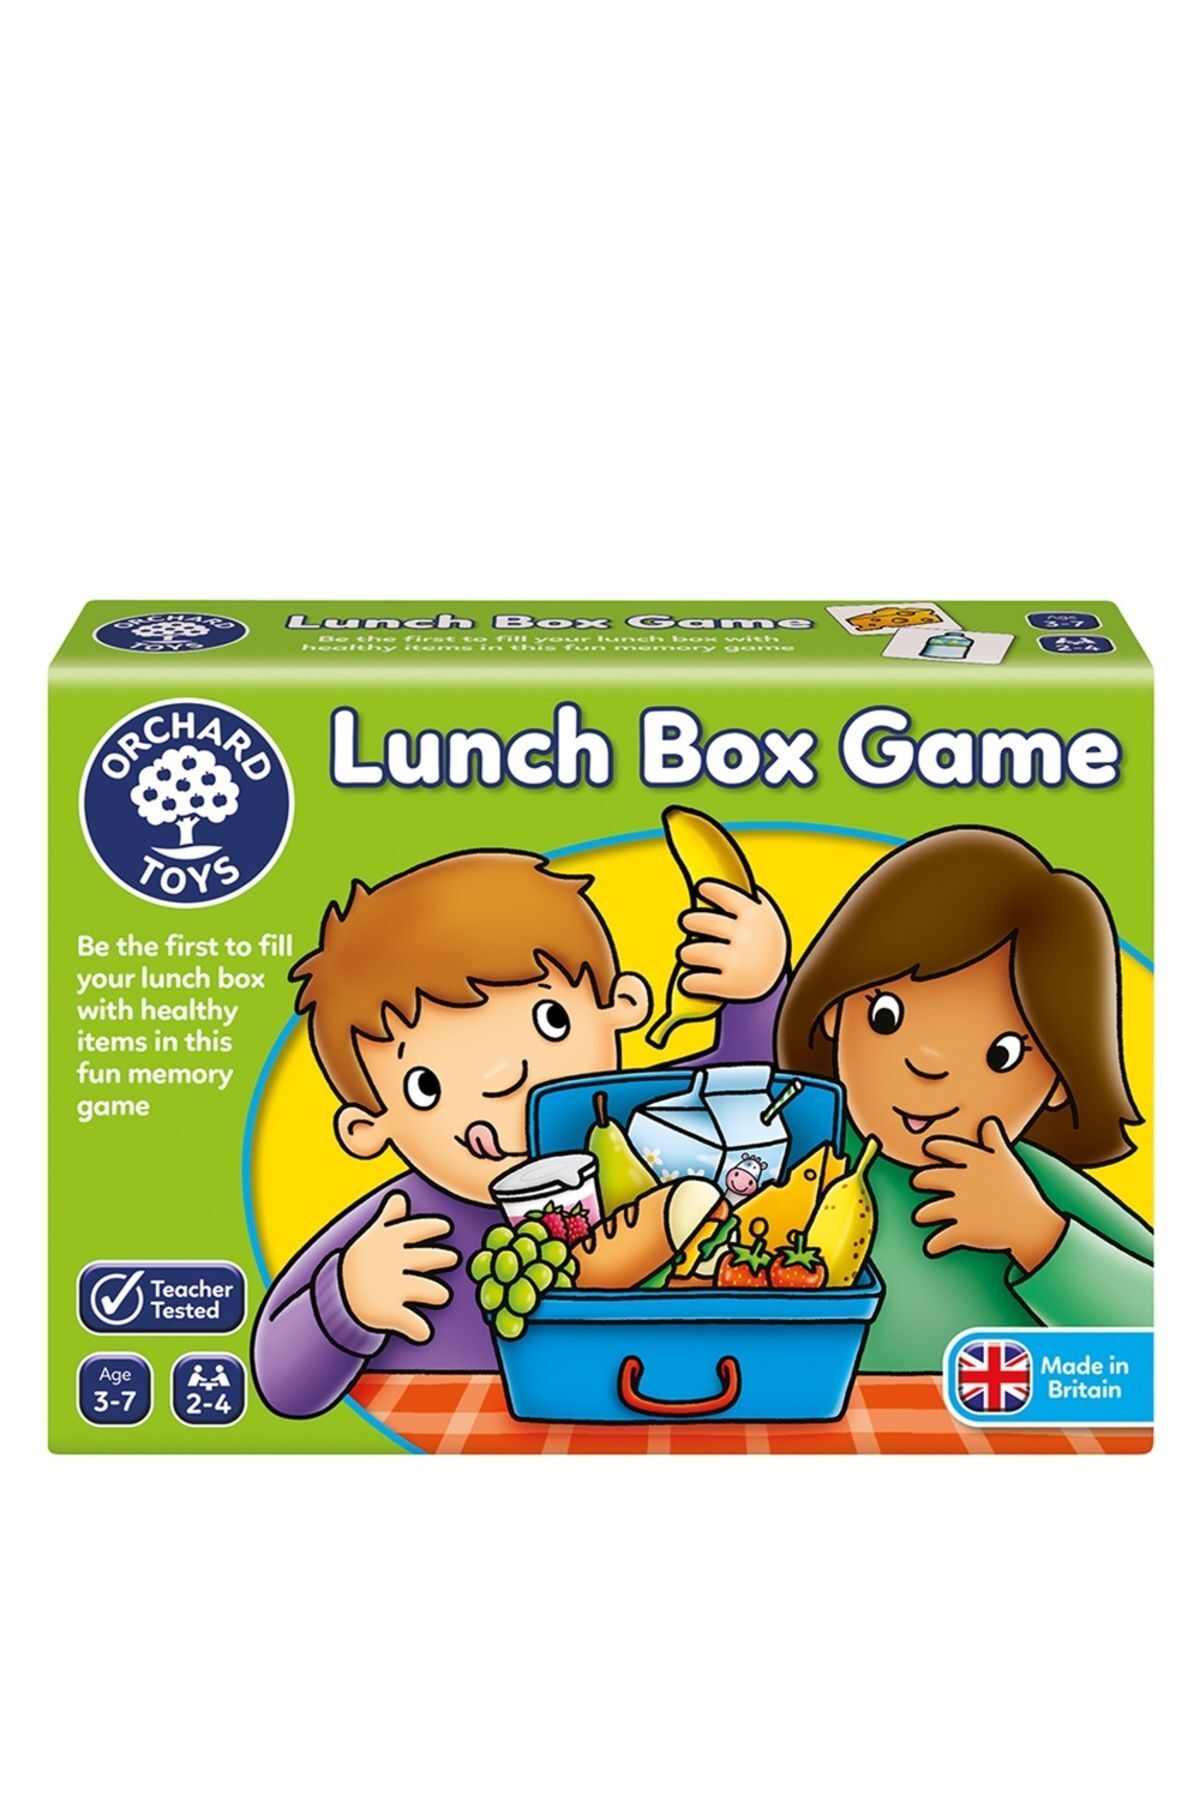 ORCHARD Lunch Box Game